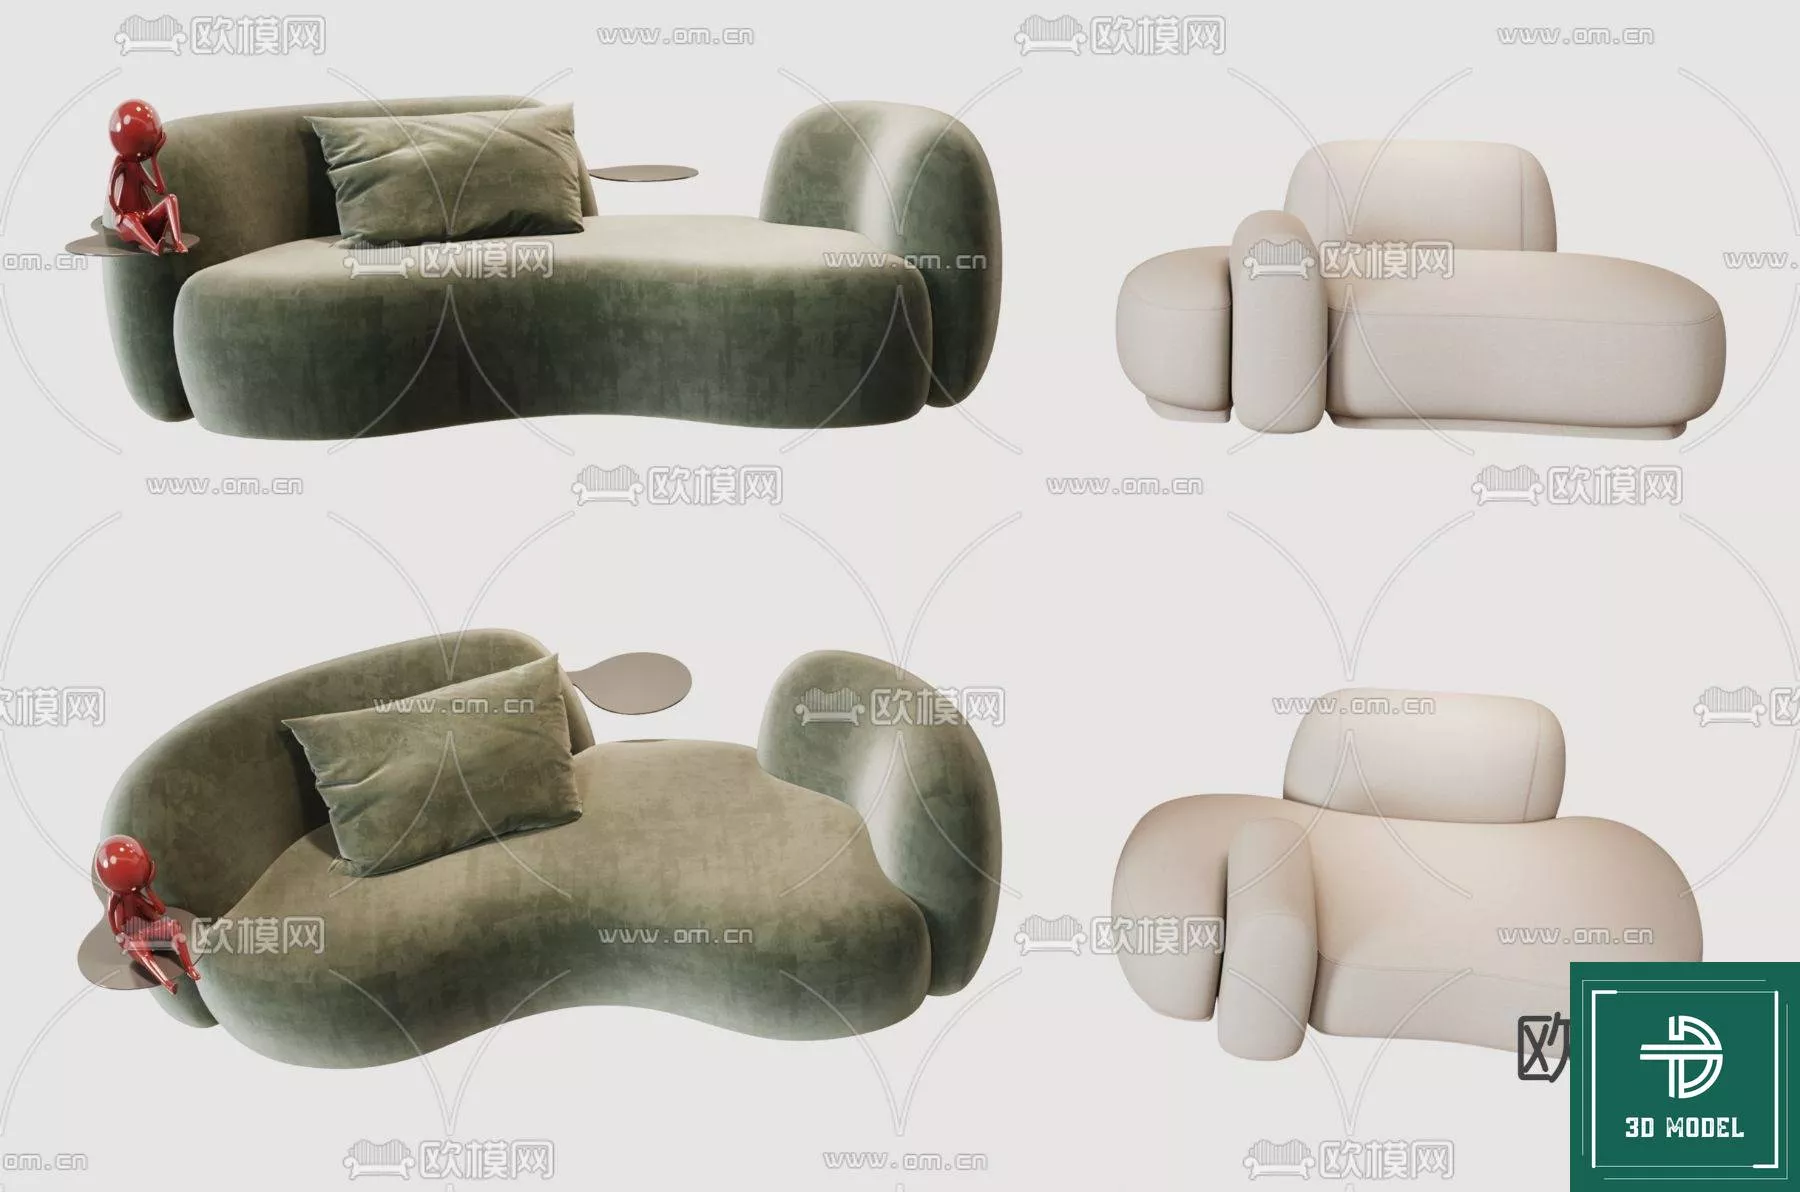 MODERN SOFA - SKETCHUP 3D MODEL - VRAY OR ENSCAPE - ID13233